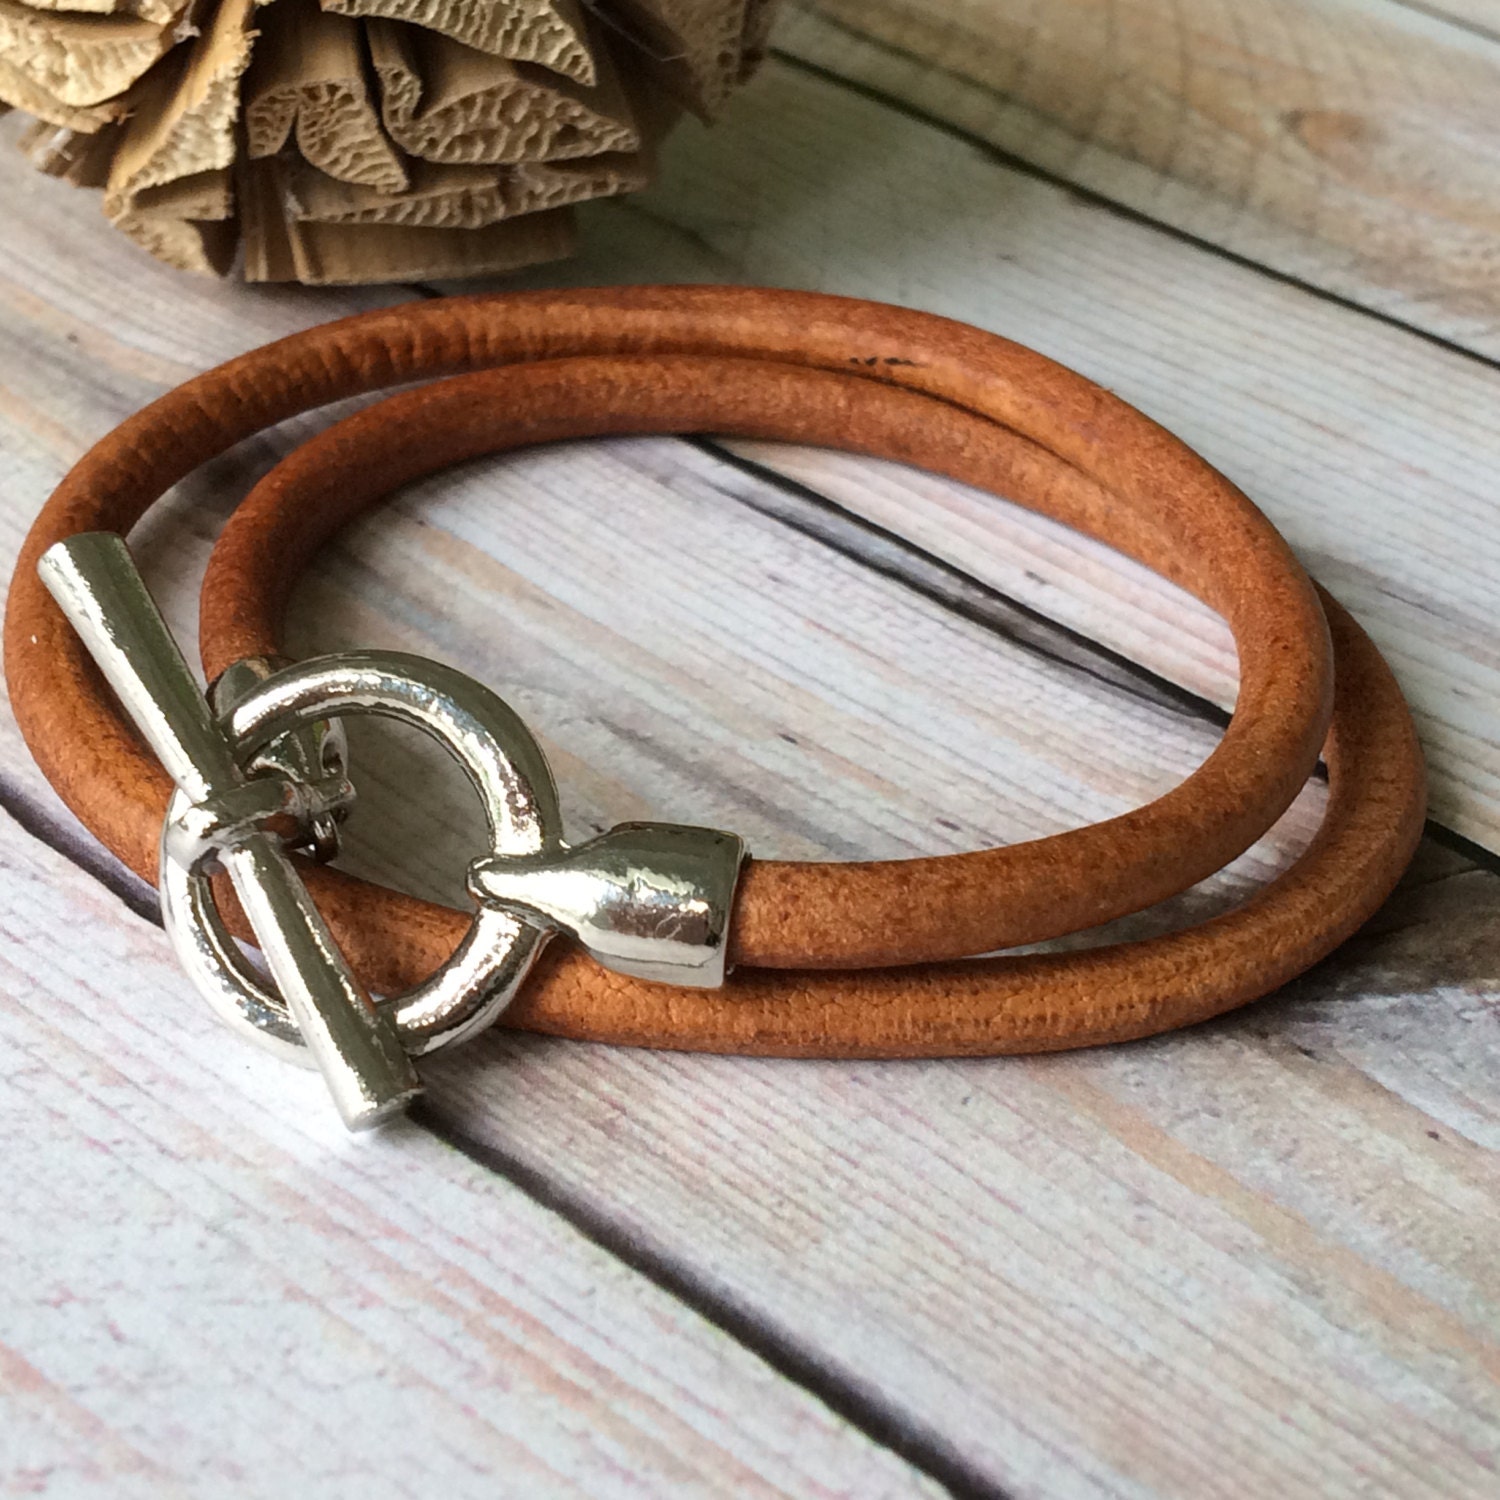 Distressed Tan Leather Bracelet with an Antique Silver Toggle